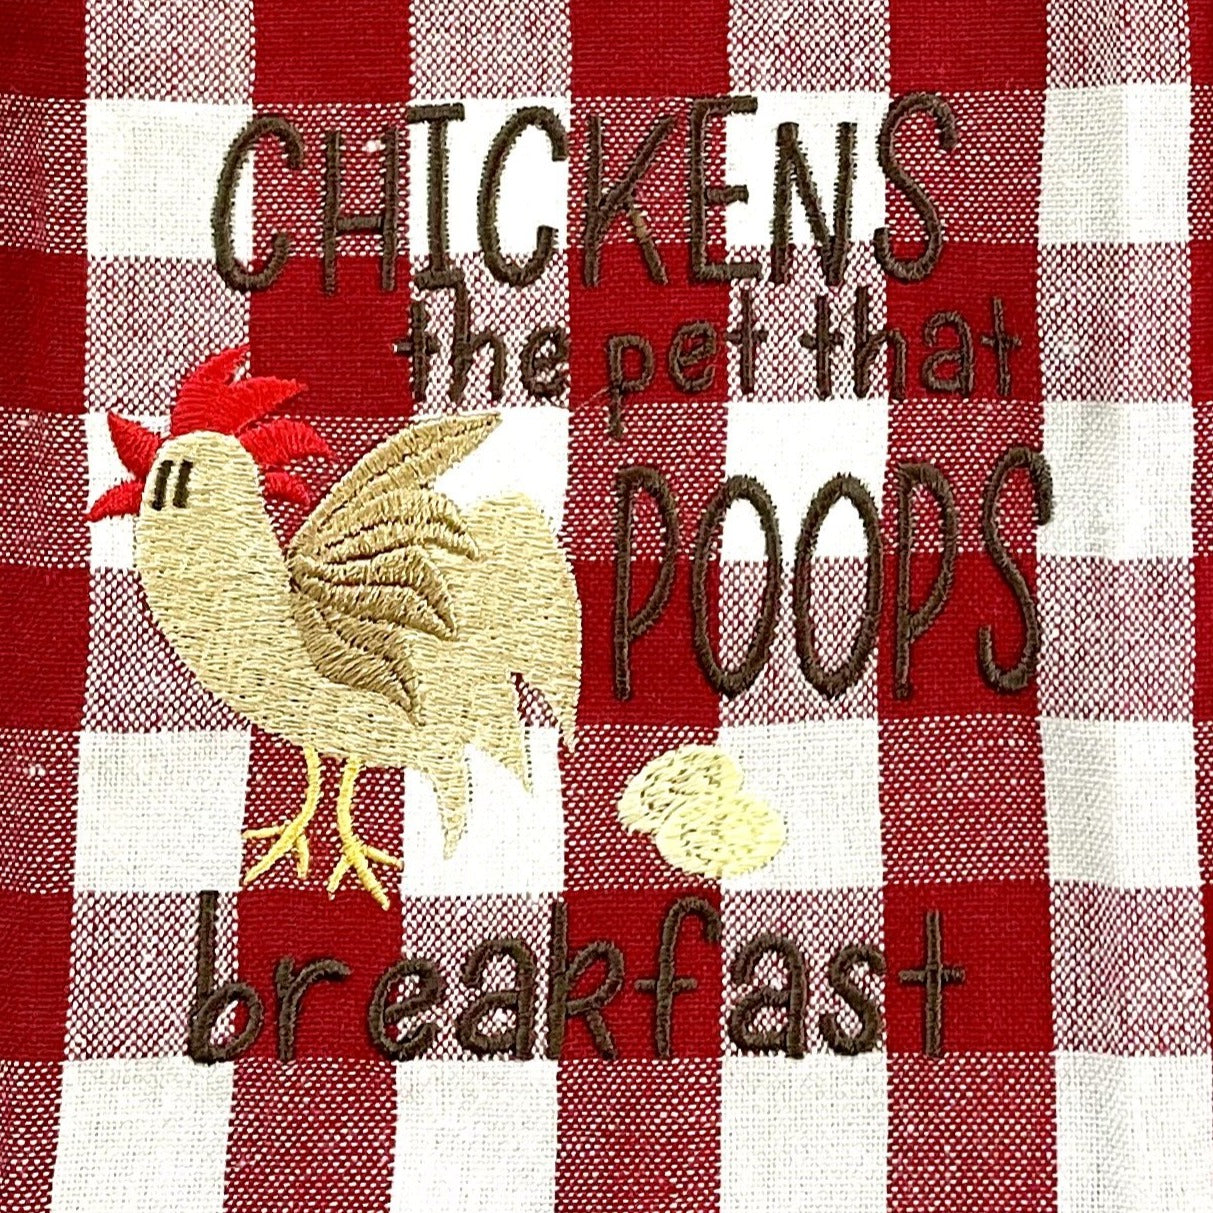 Embroidered "Chickens The Pet That Poops Breakfast" Kitchen Towel. Cotton Towels